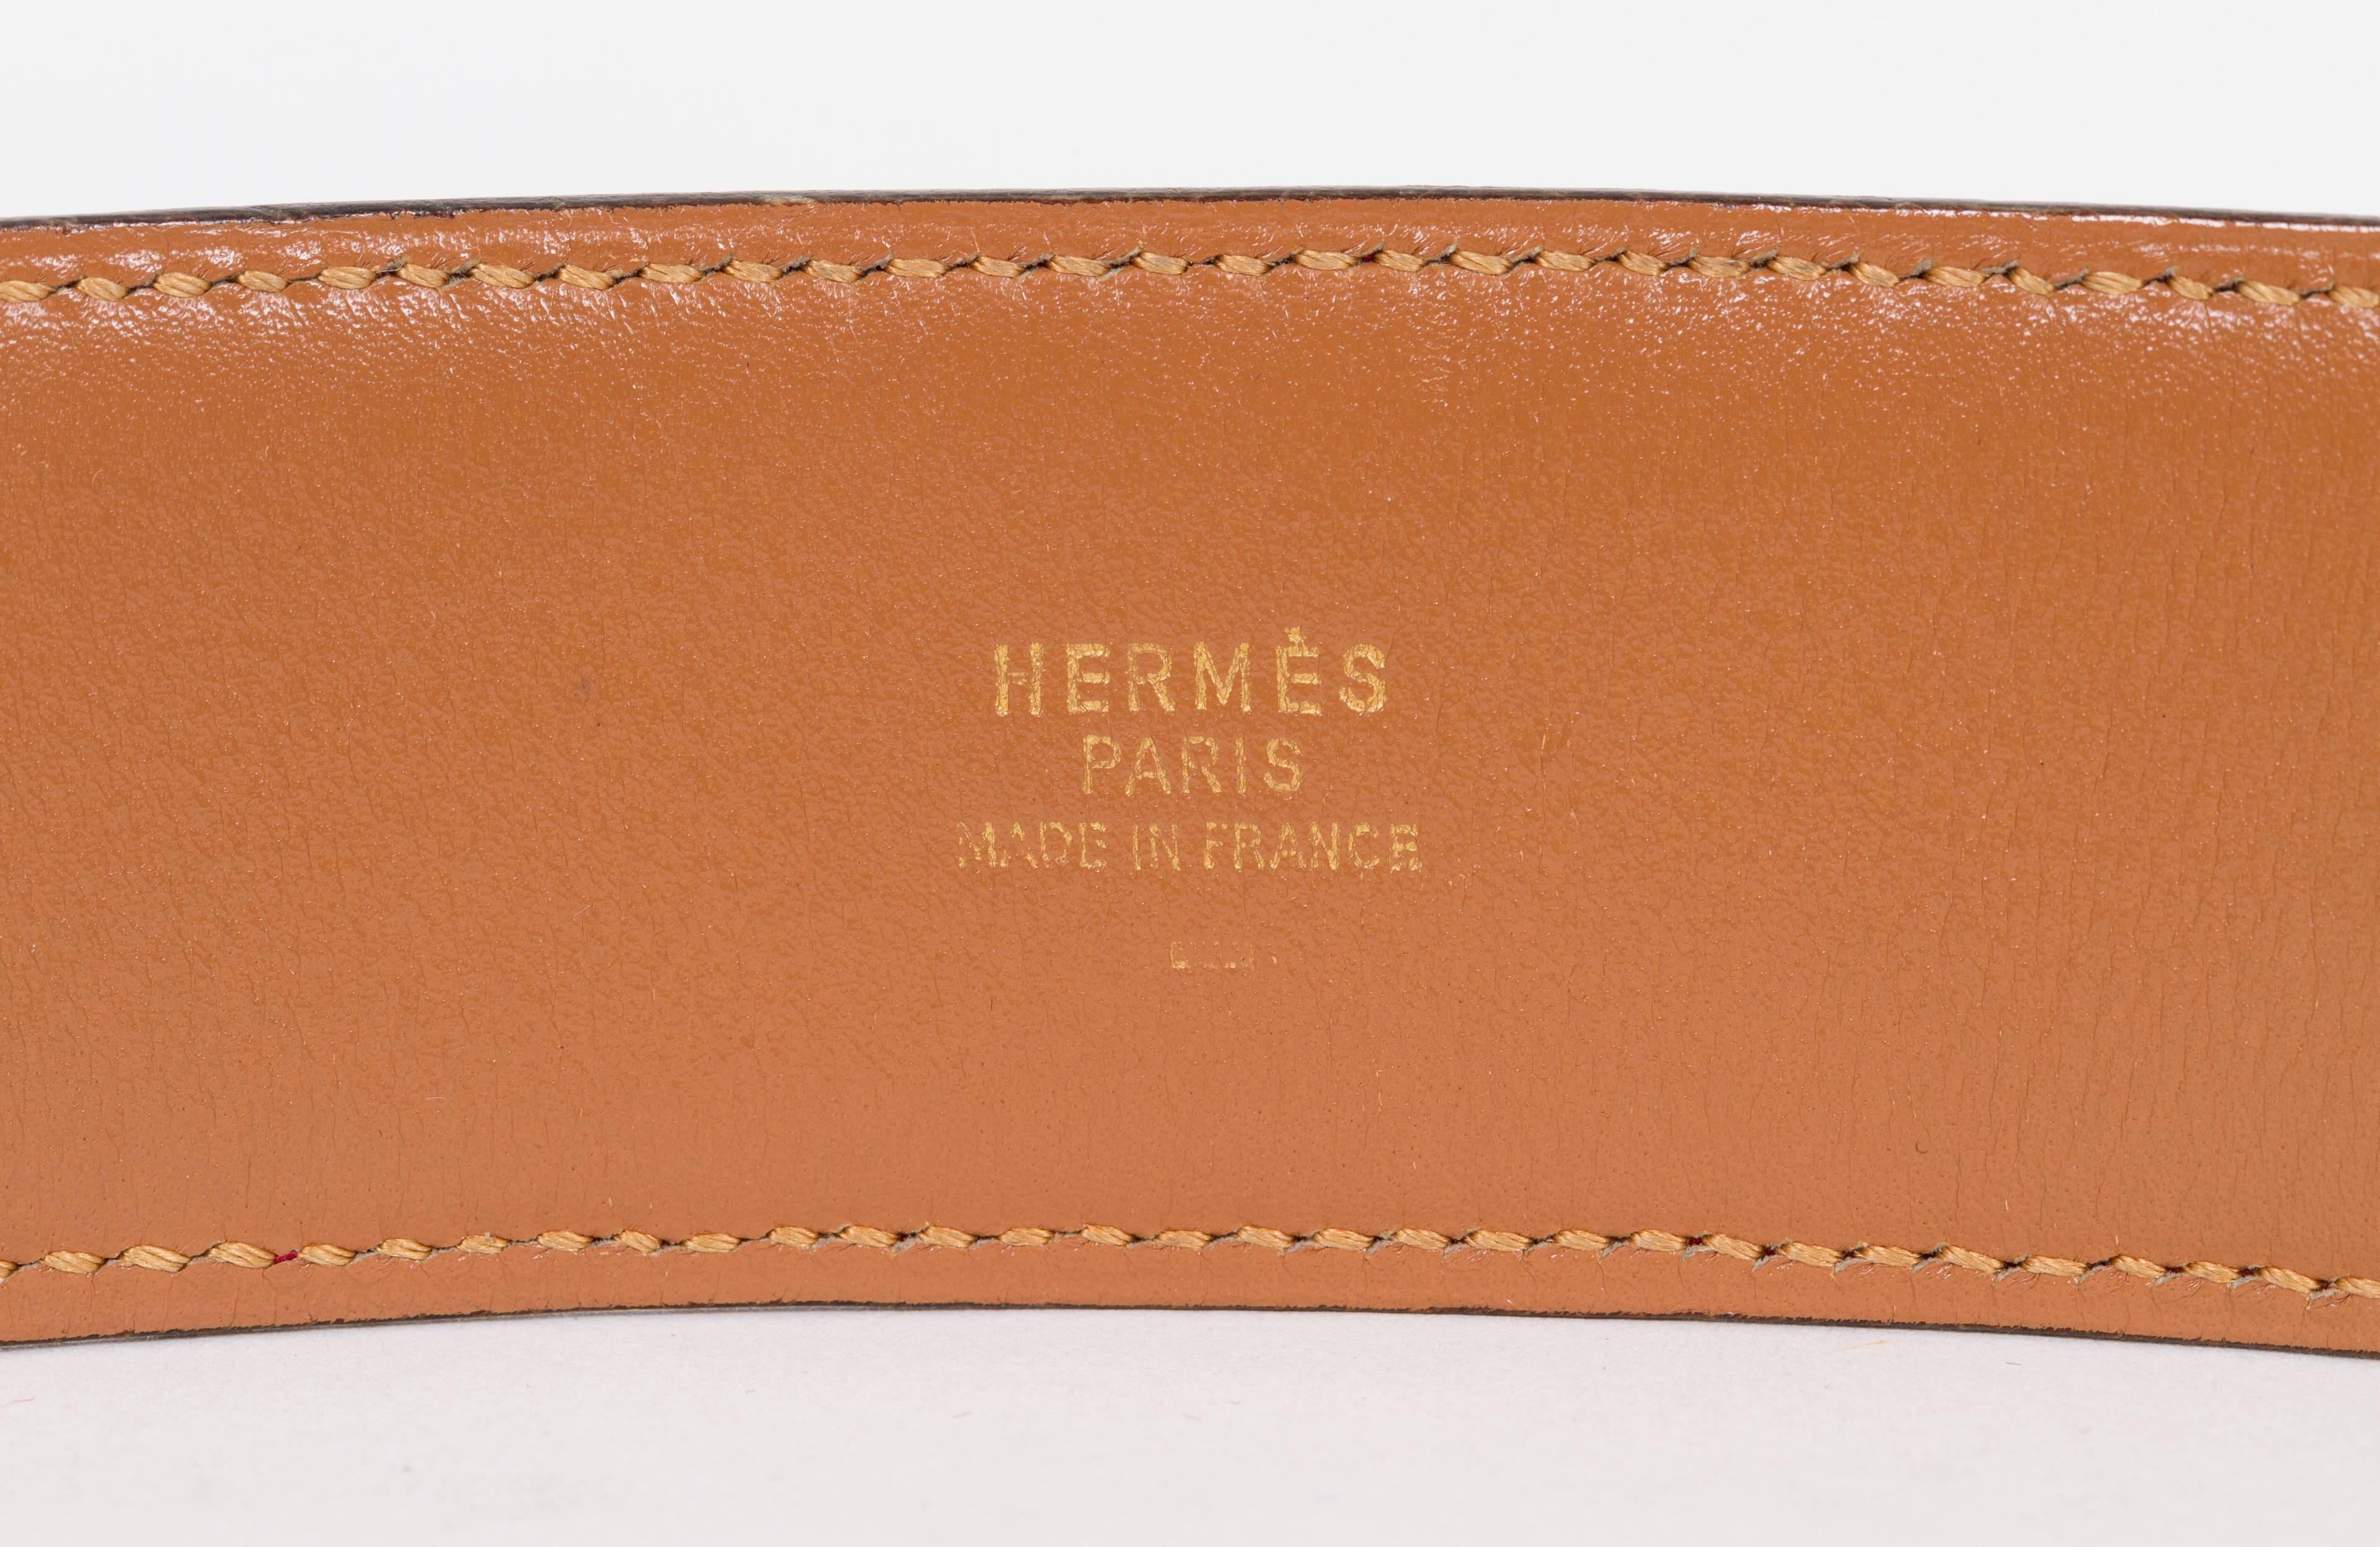 Hermès collier de Chien red lizard belt with gold rhodium metal. Size 75 cm. Dated Y in a circle for 1995. Comes in original dust bag.